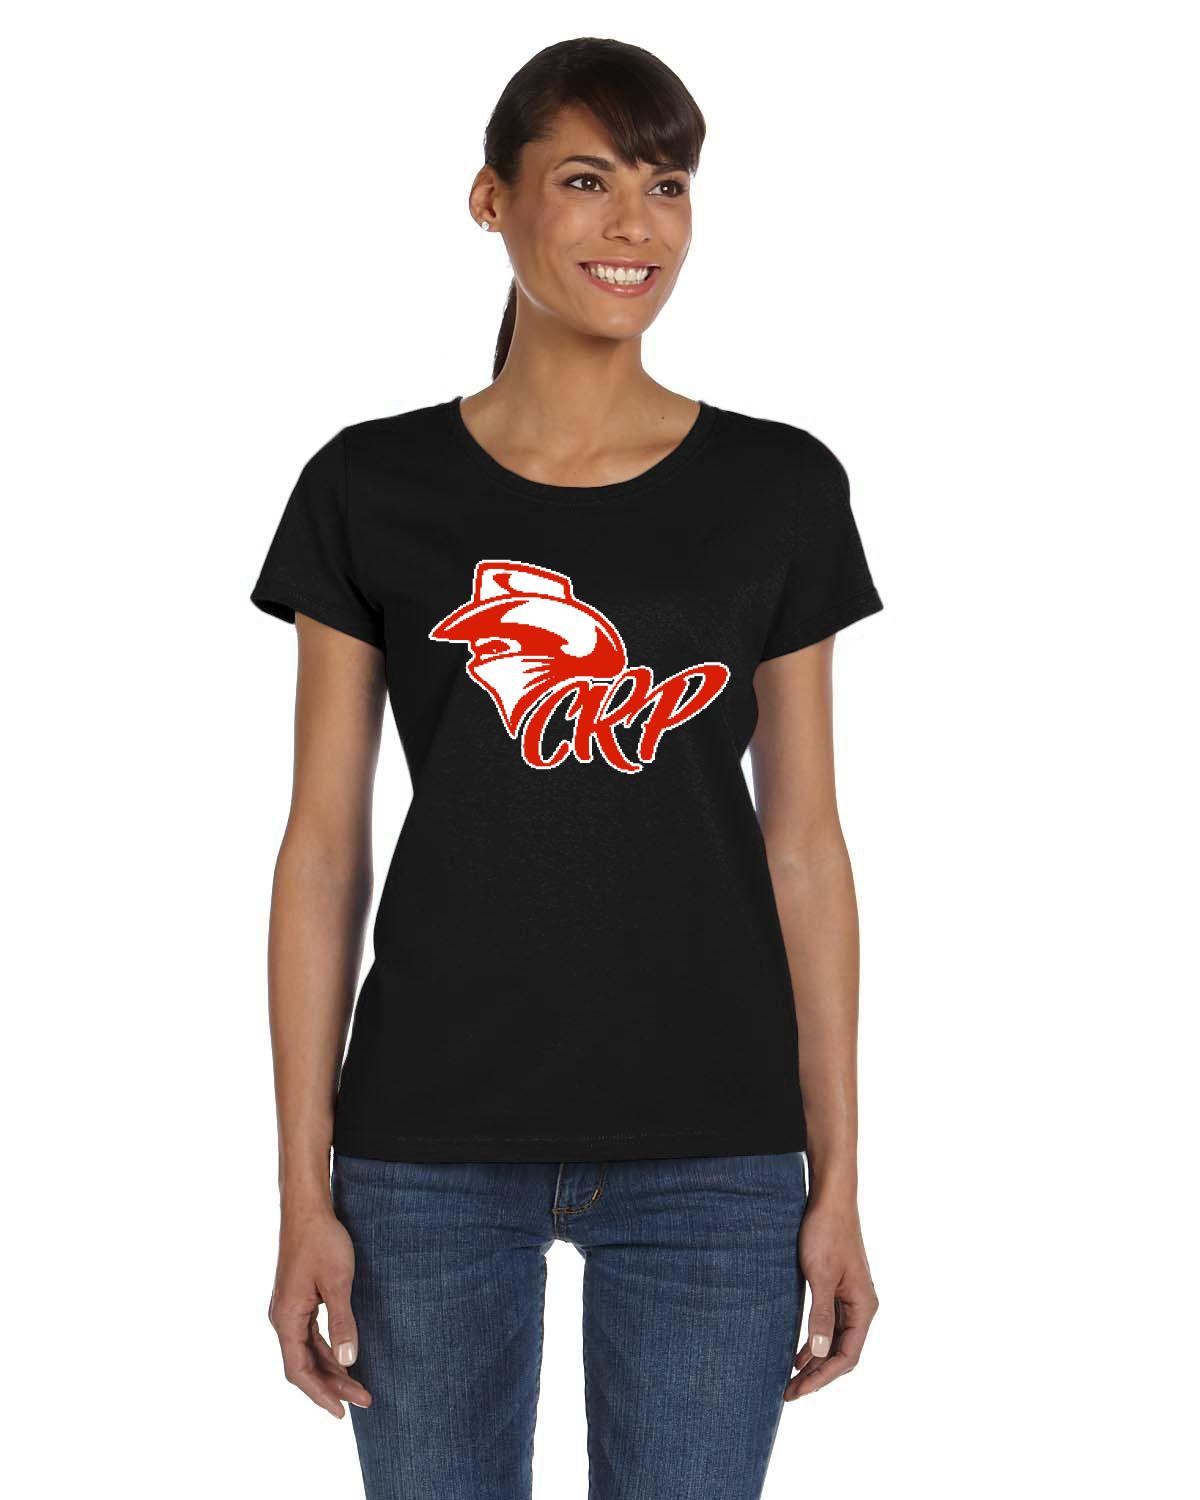 Cabral Racing Promotions Women's T-Shirt